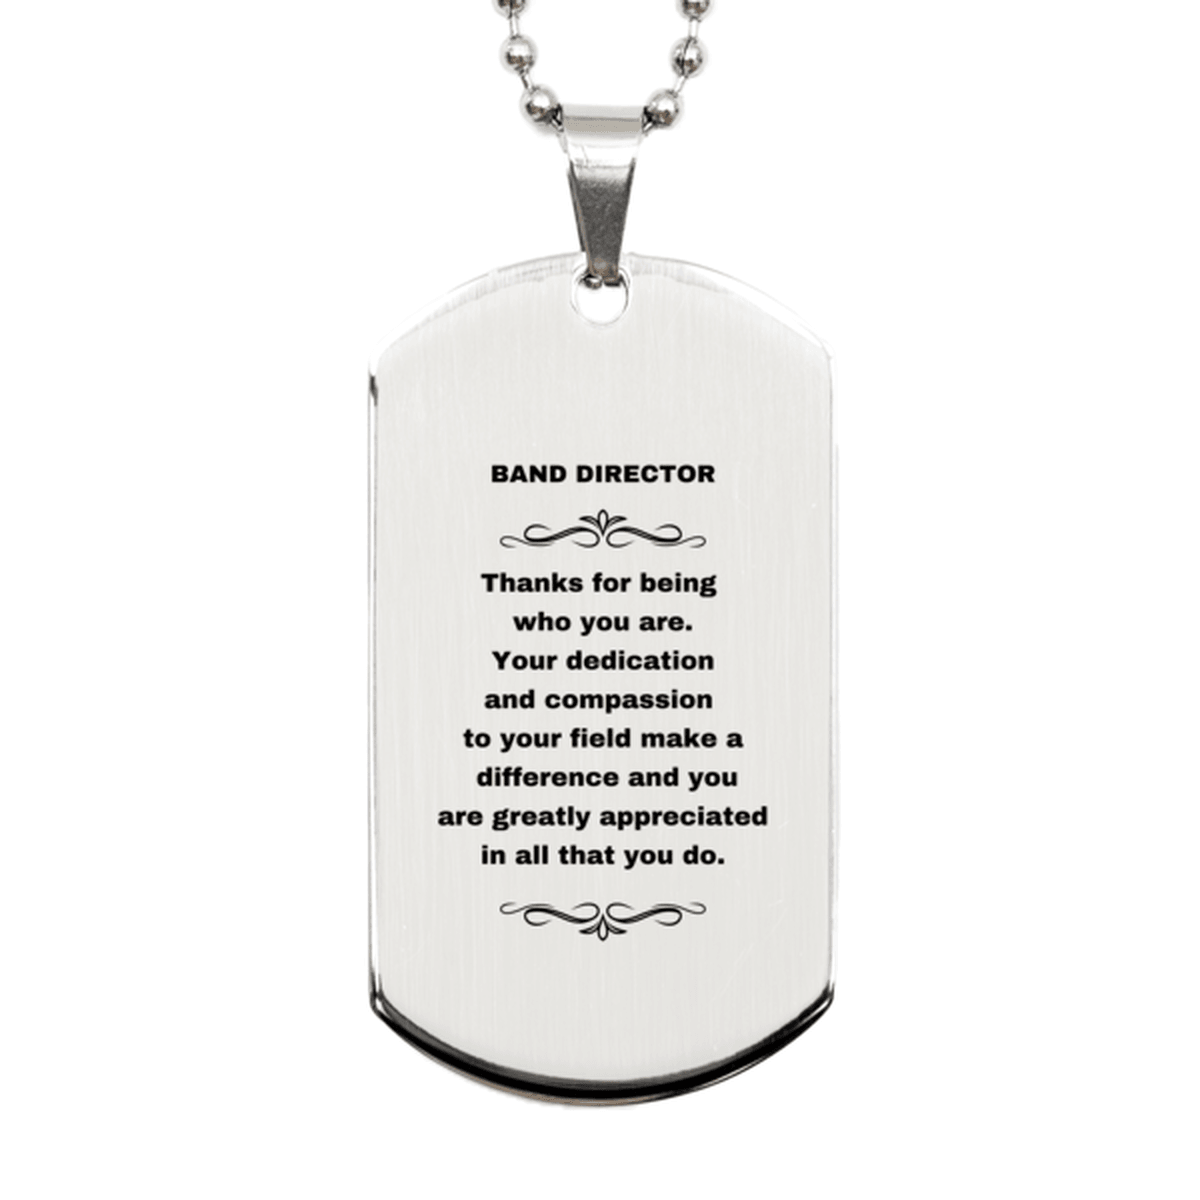 Band Director Silver Dog Tag Engraved Necklace - Thanks for being who you are - Birthday Christmas Jewelry Gifts Coworkers Colleague Boss - Mallard Moon Gift Shop